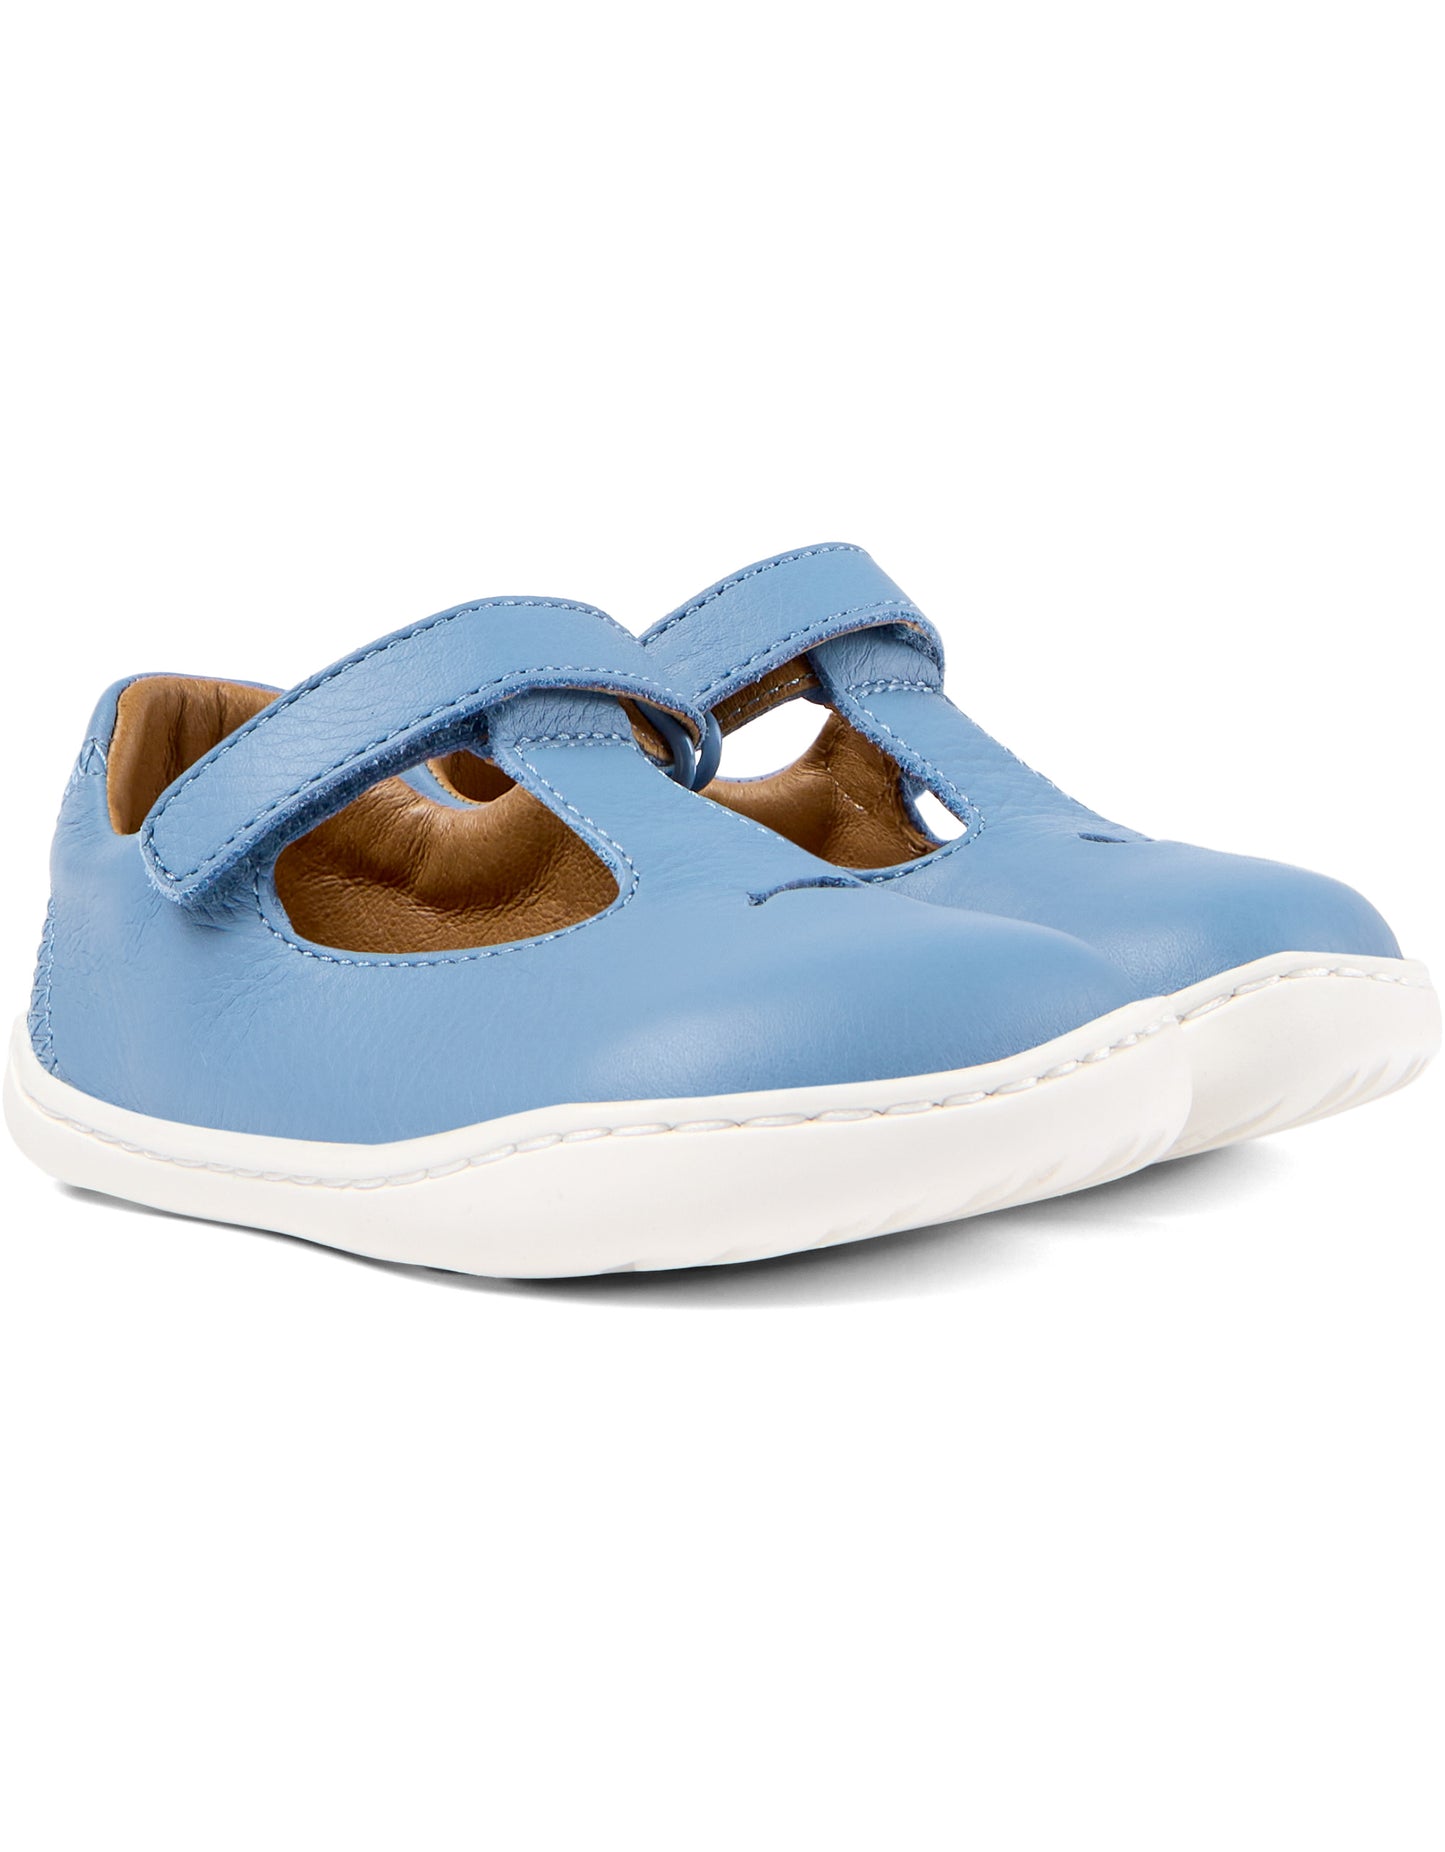 A T-bar shoe by Camper, style K800564-001, in blue with cut out fish detail. Velcro fastening. Front angled view of a pair.